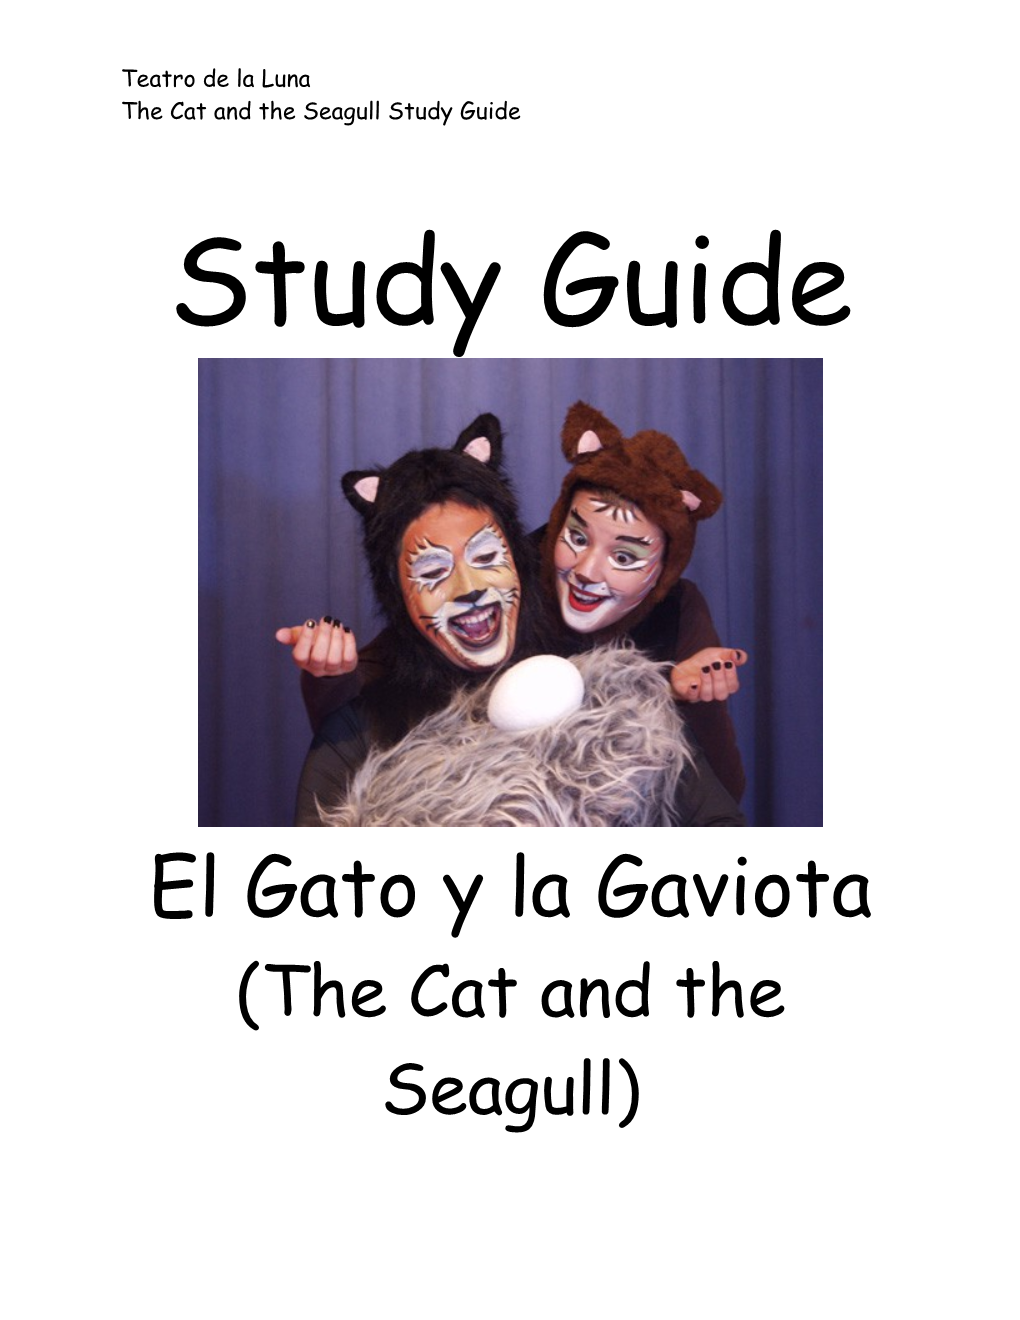 The Cat and the Seagull Study Guide